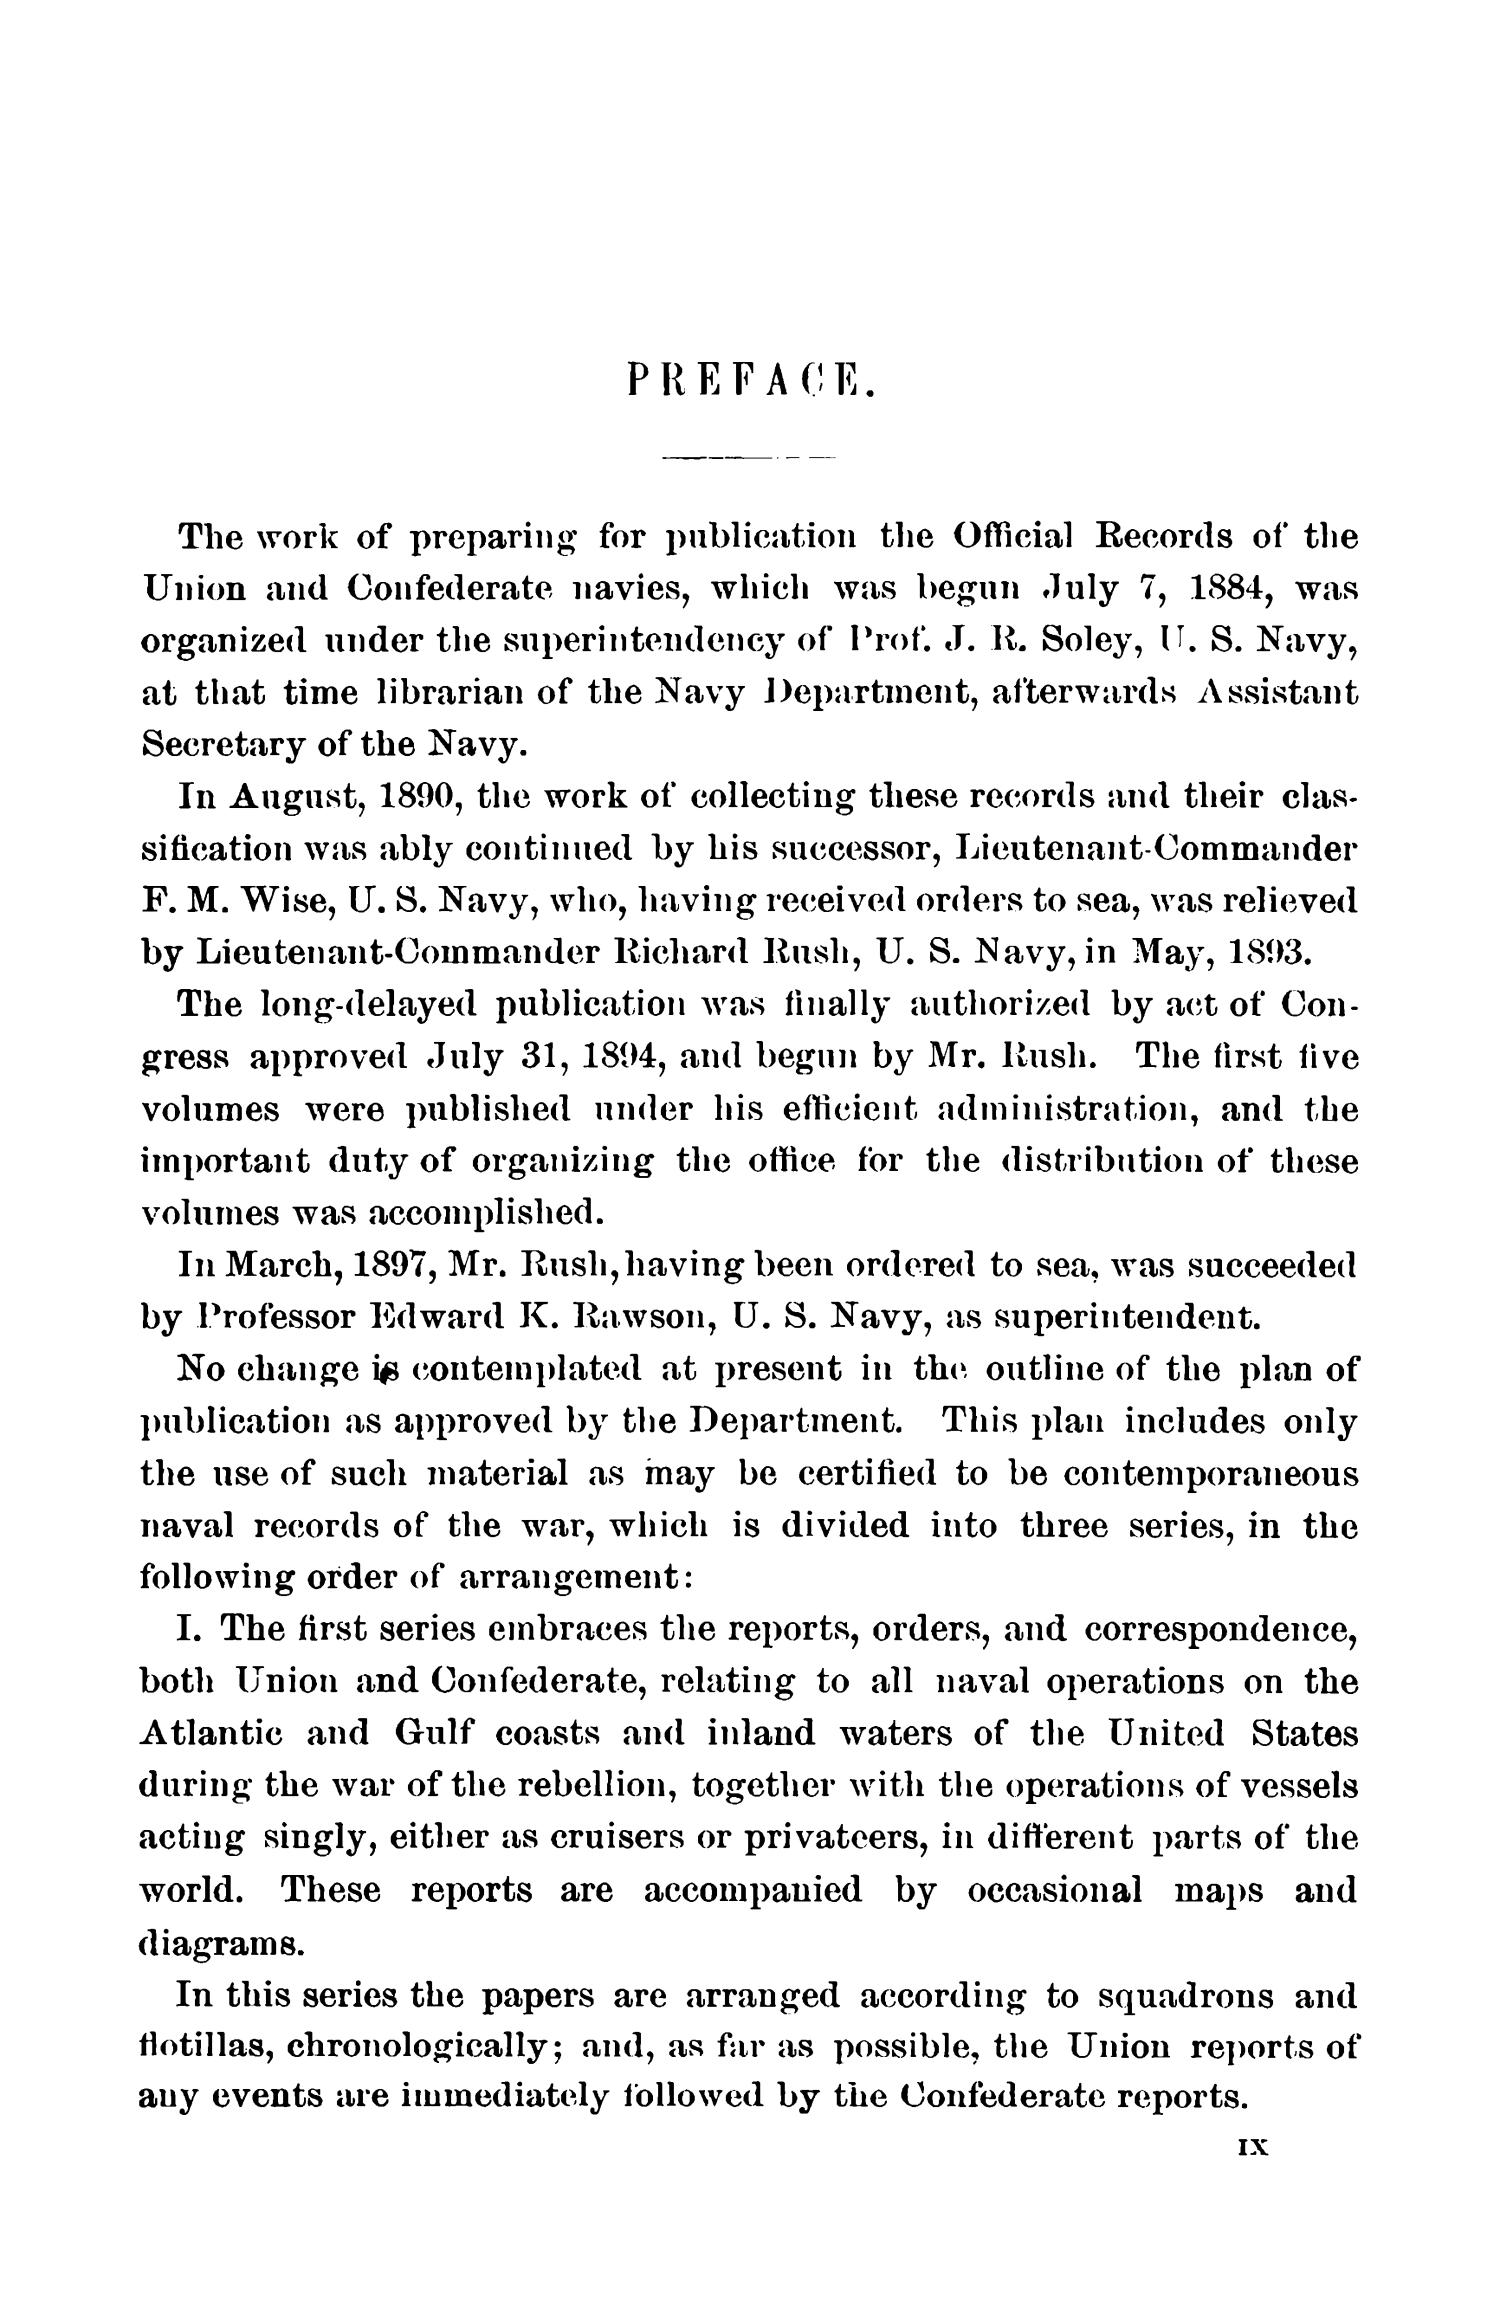 Official Records of the Union and Confederate Navies in the War of the Rebellion. Series 1, Volume 8.
                                                
                                                    IX
                                                